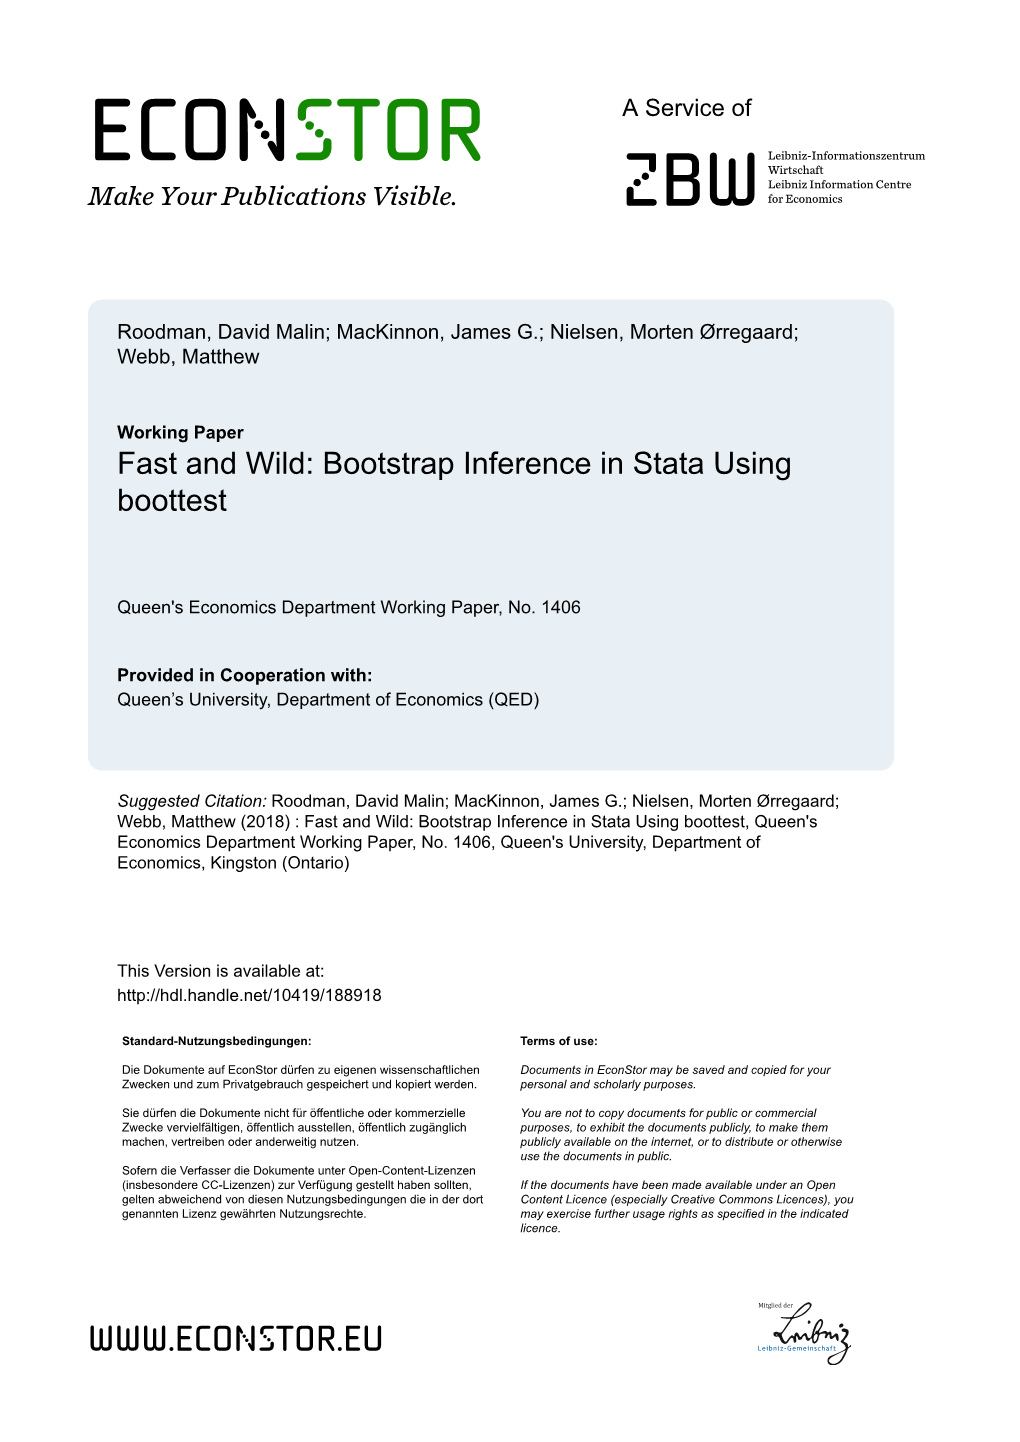 Fast and Wild: Bootstrap Inference in Stata Using Boottest